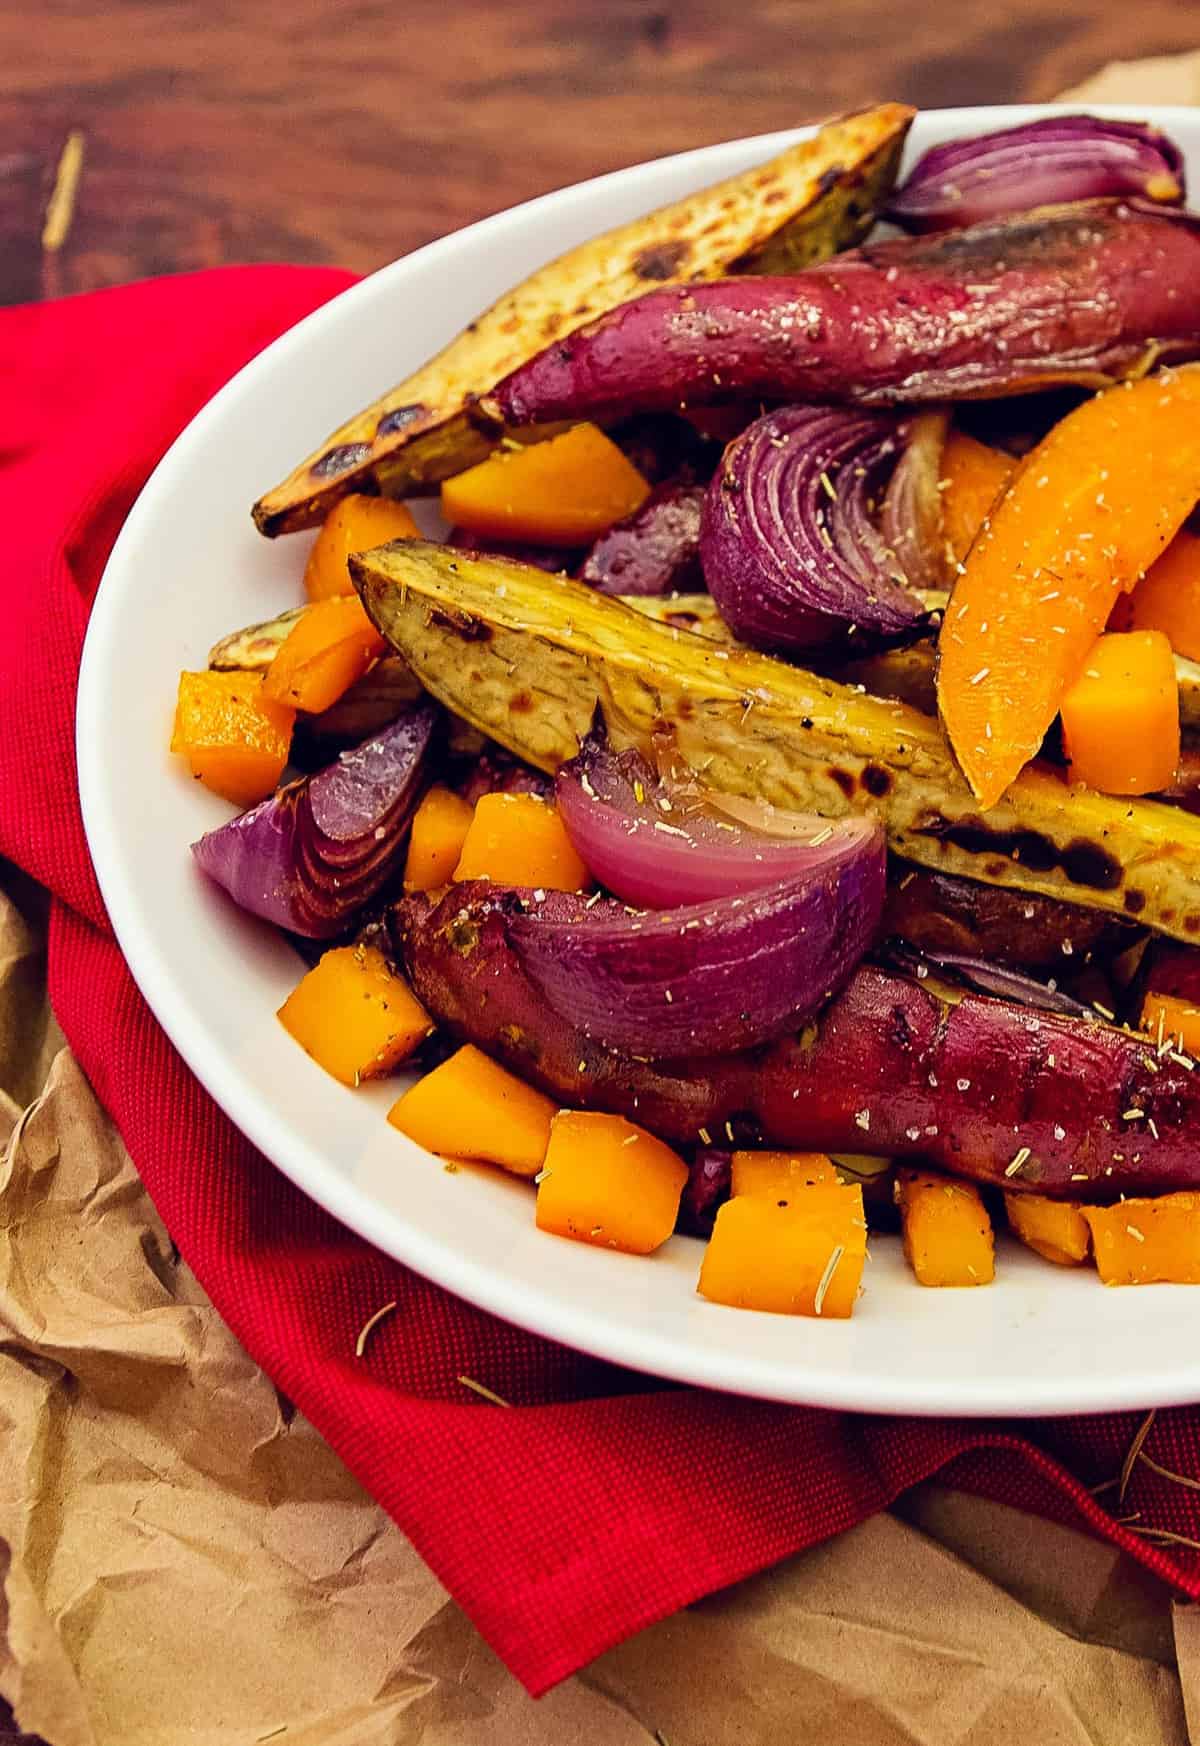 oven roasted rosemary root vegetables, oven roasted, root vegetables, veggies, rosemary, rosemary vegetables, whole food plant based, plant based, vegan, vegetarian, vegan side dish, vegetarian side dish, side, sides, side dish, oil free, no oil, refined sugar free, sweet potatoes, potatoes, Japanese sweet potatoes, butternut squash, squash, gluten free, quick, easy, fast